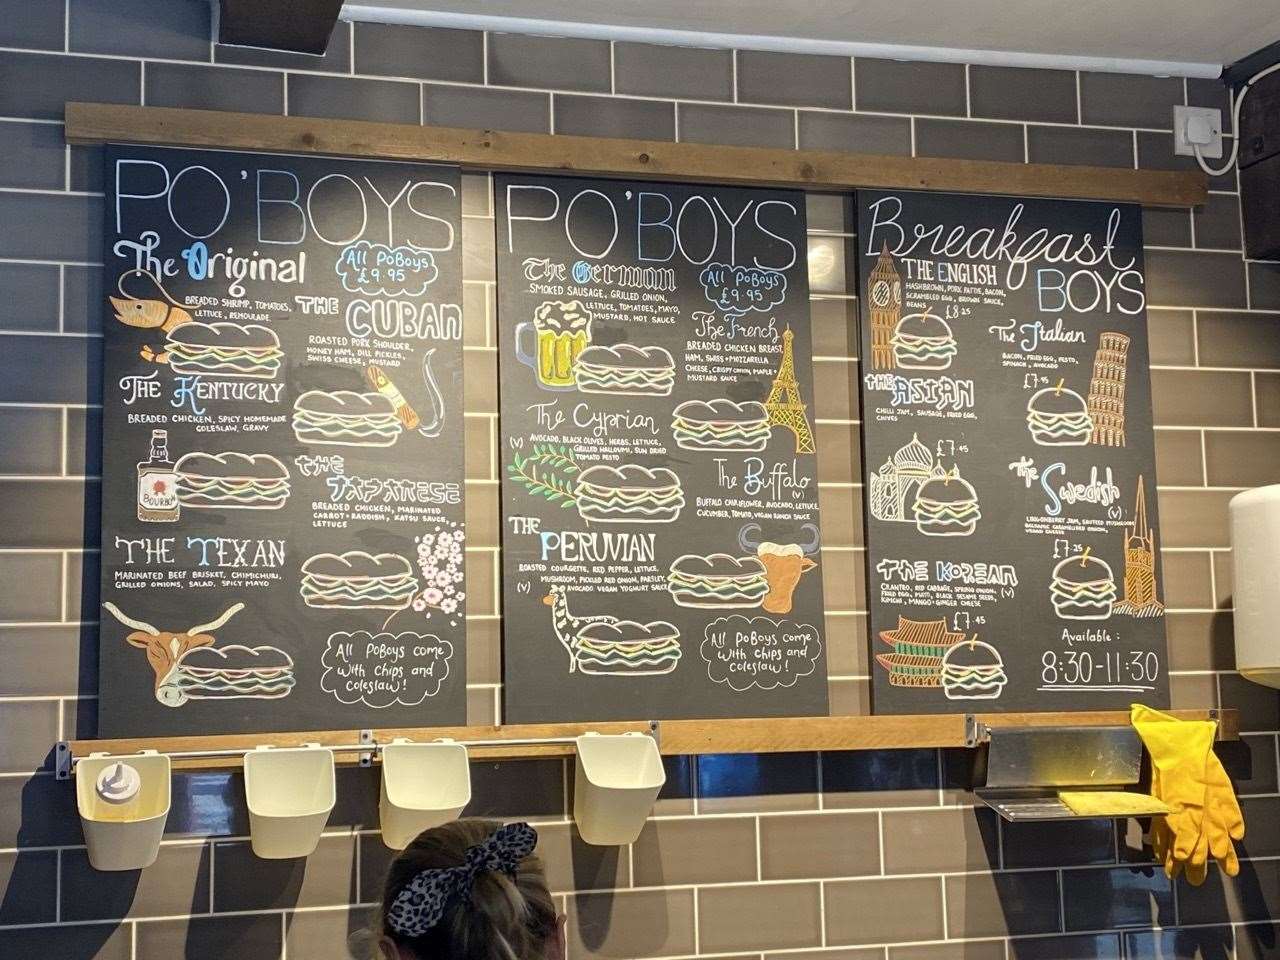 Each sandwich at Po'Boys is based on the cuisine of a different place